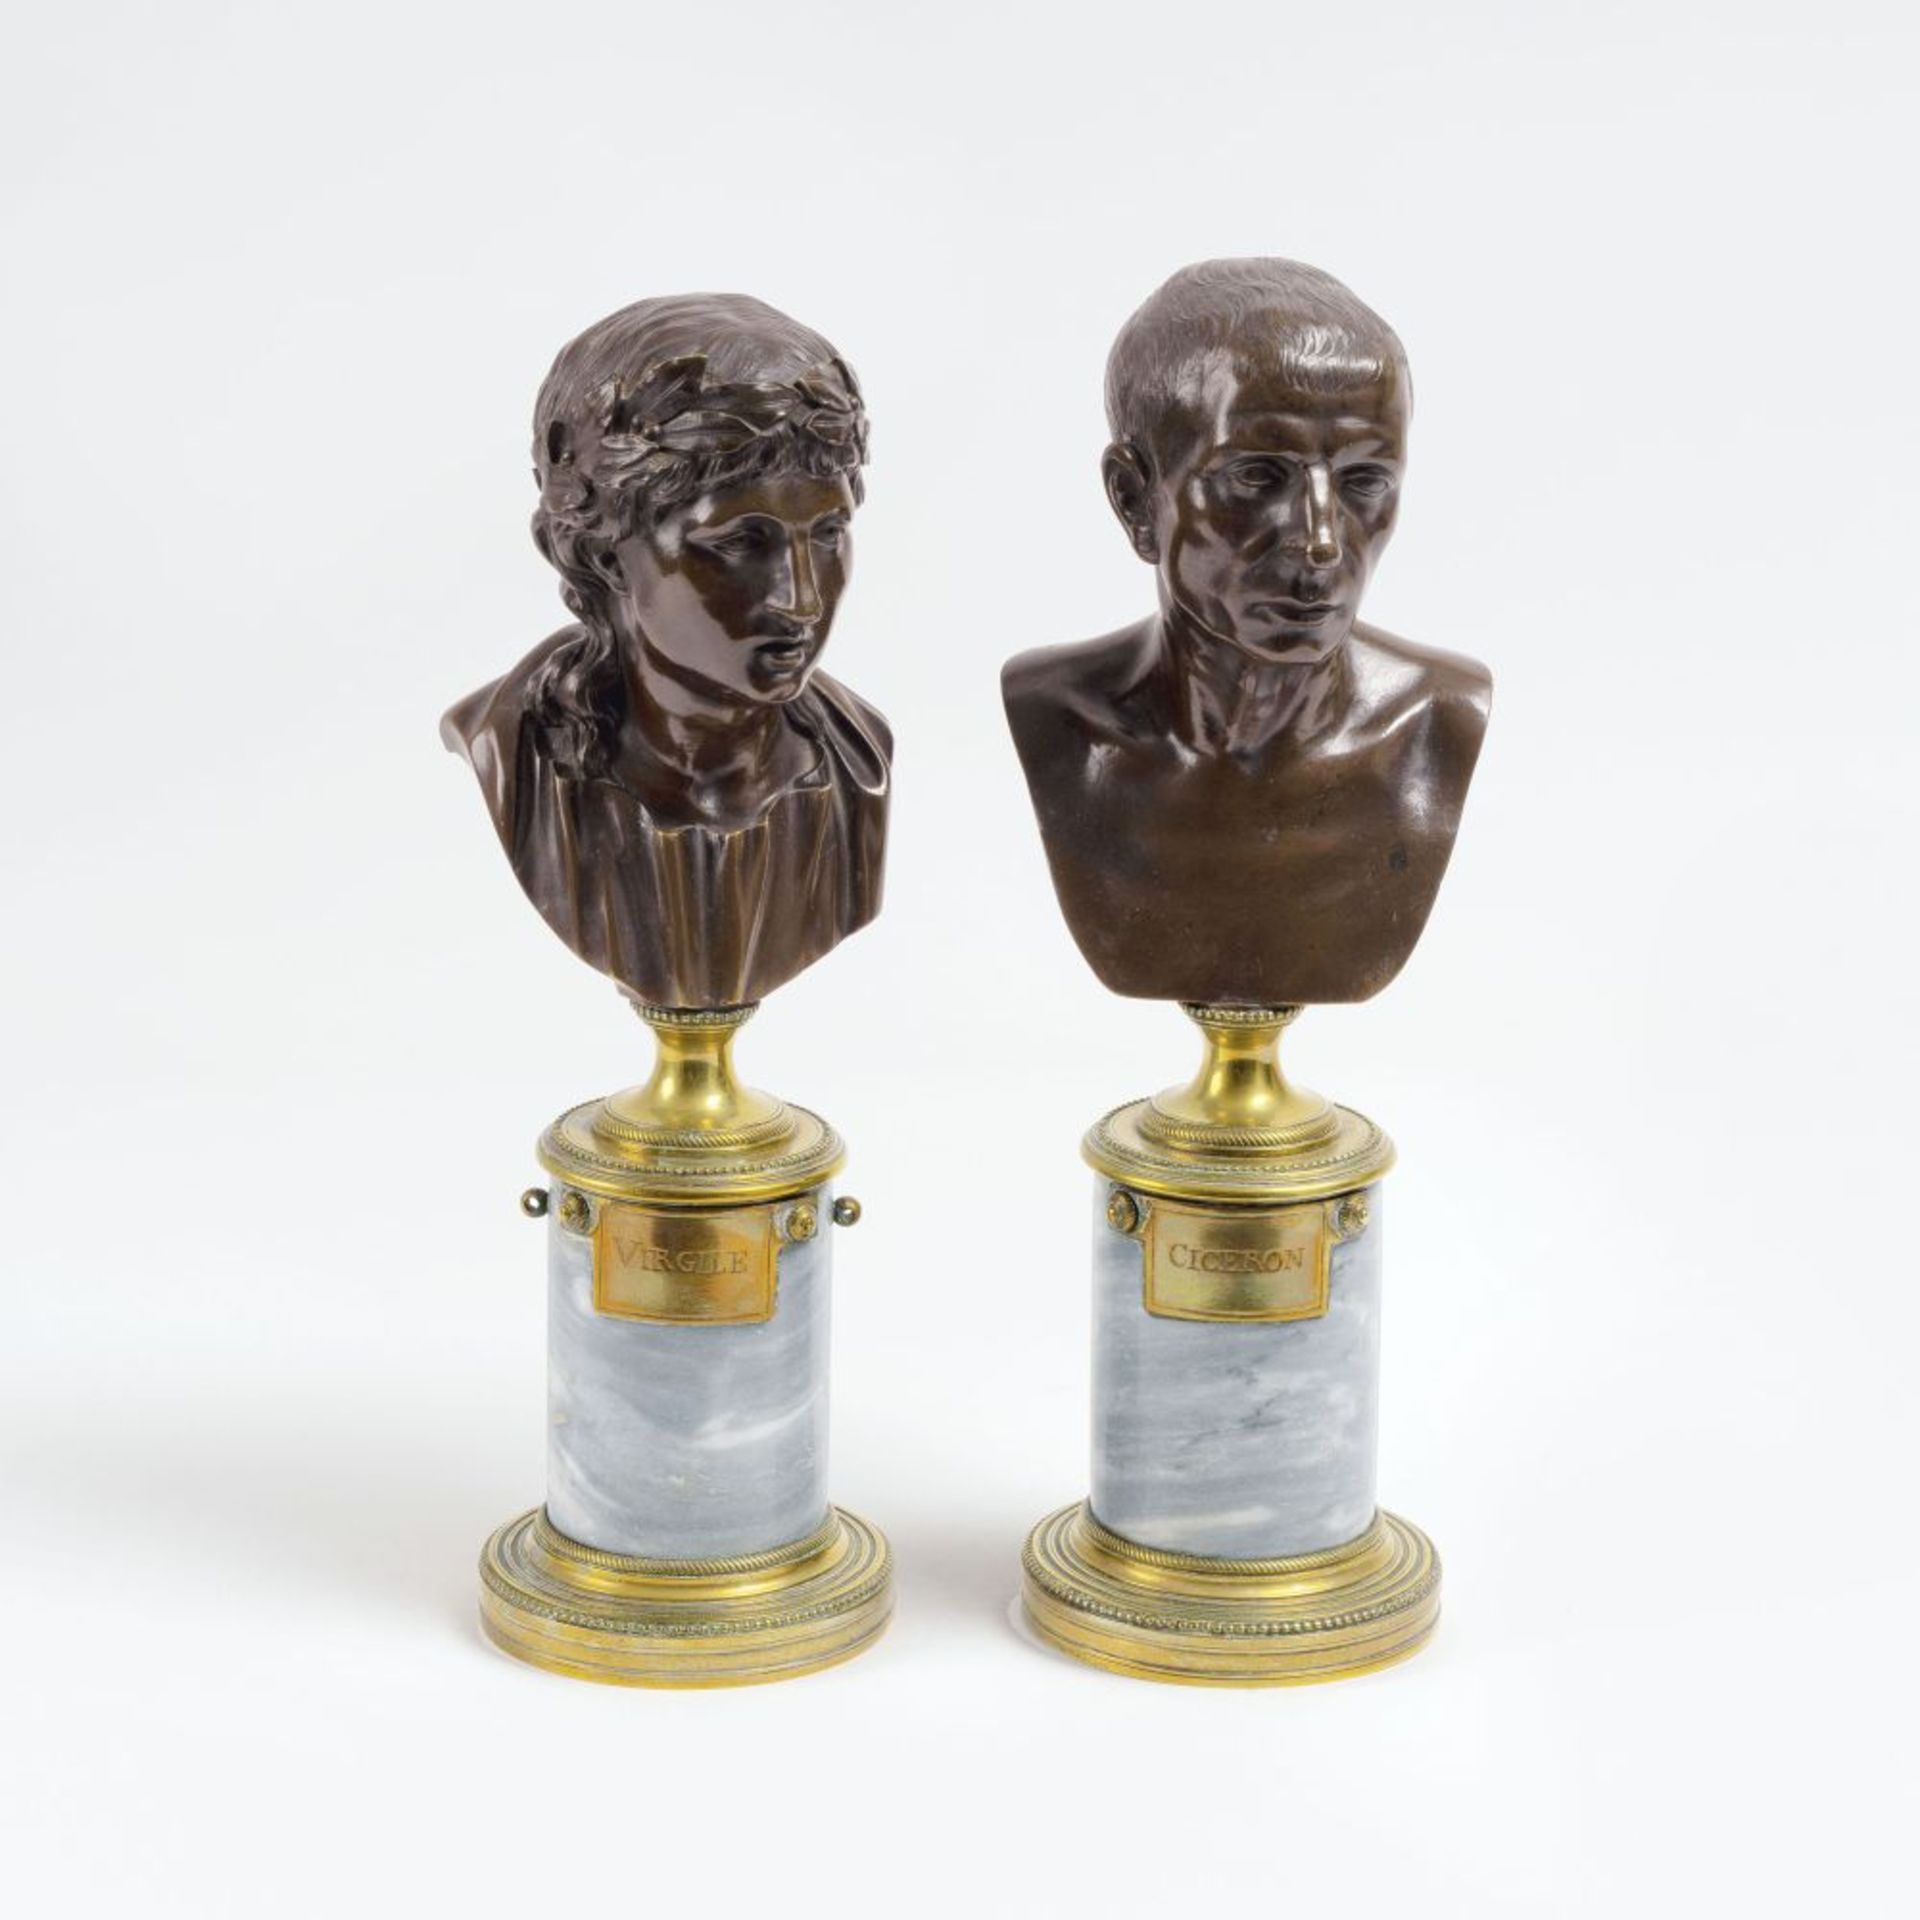 A Pair of Classicist Portrait Busts 'Virgil' and 'Cicero'.